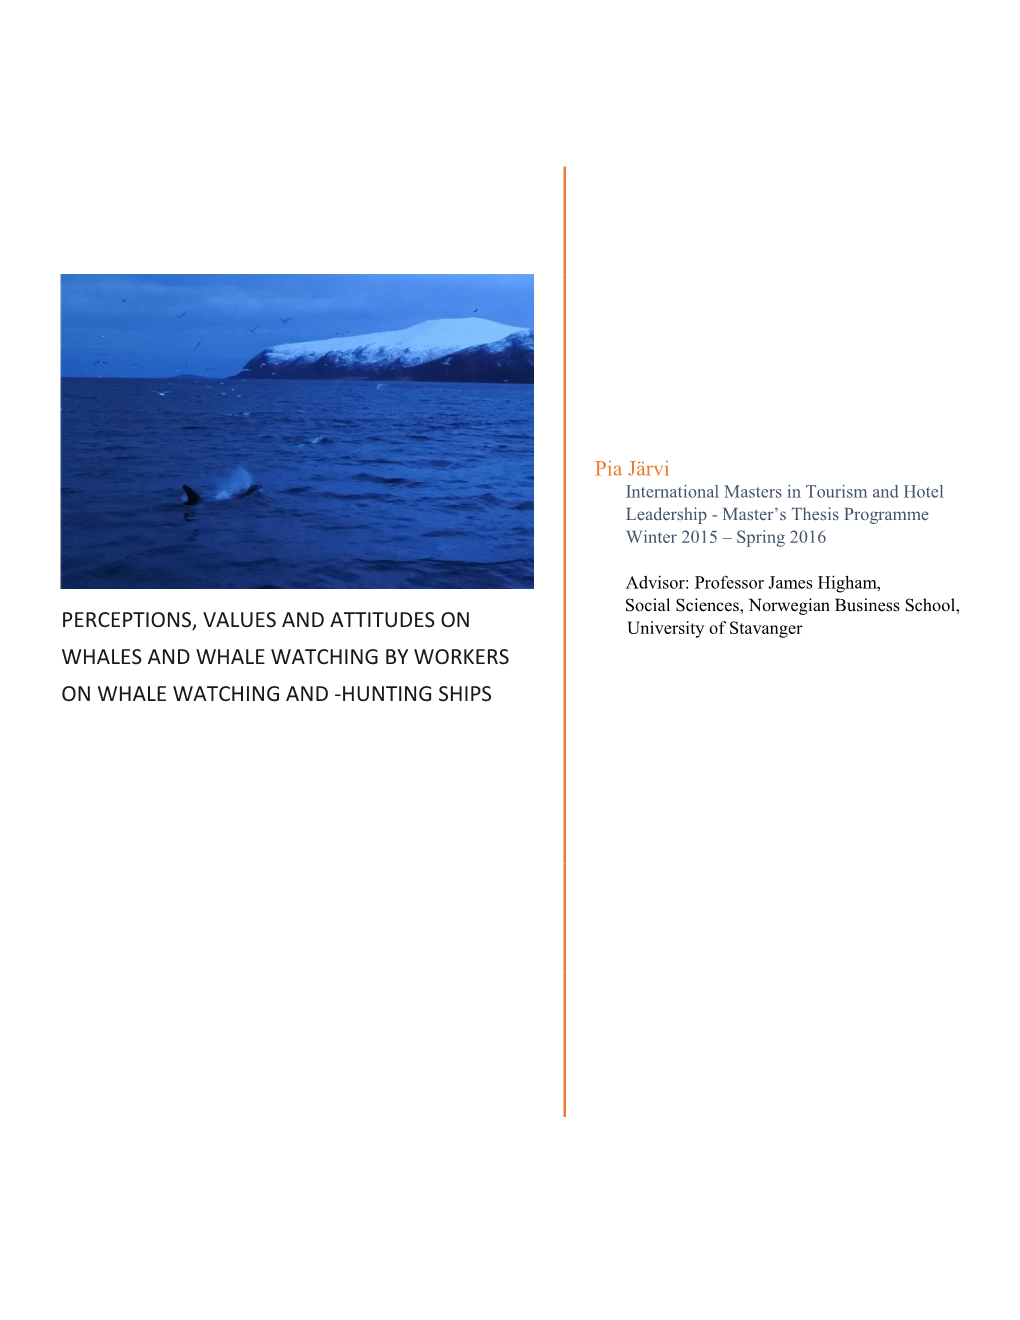 PERCEPTIONS, VALUES and ATTITUDES on University of Stavanger WHALES and WHALE WATCHING by WORKERS on WHALE WATCHING and -HUNTING SHIPS